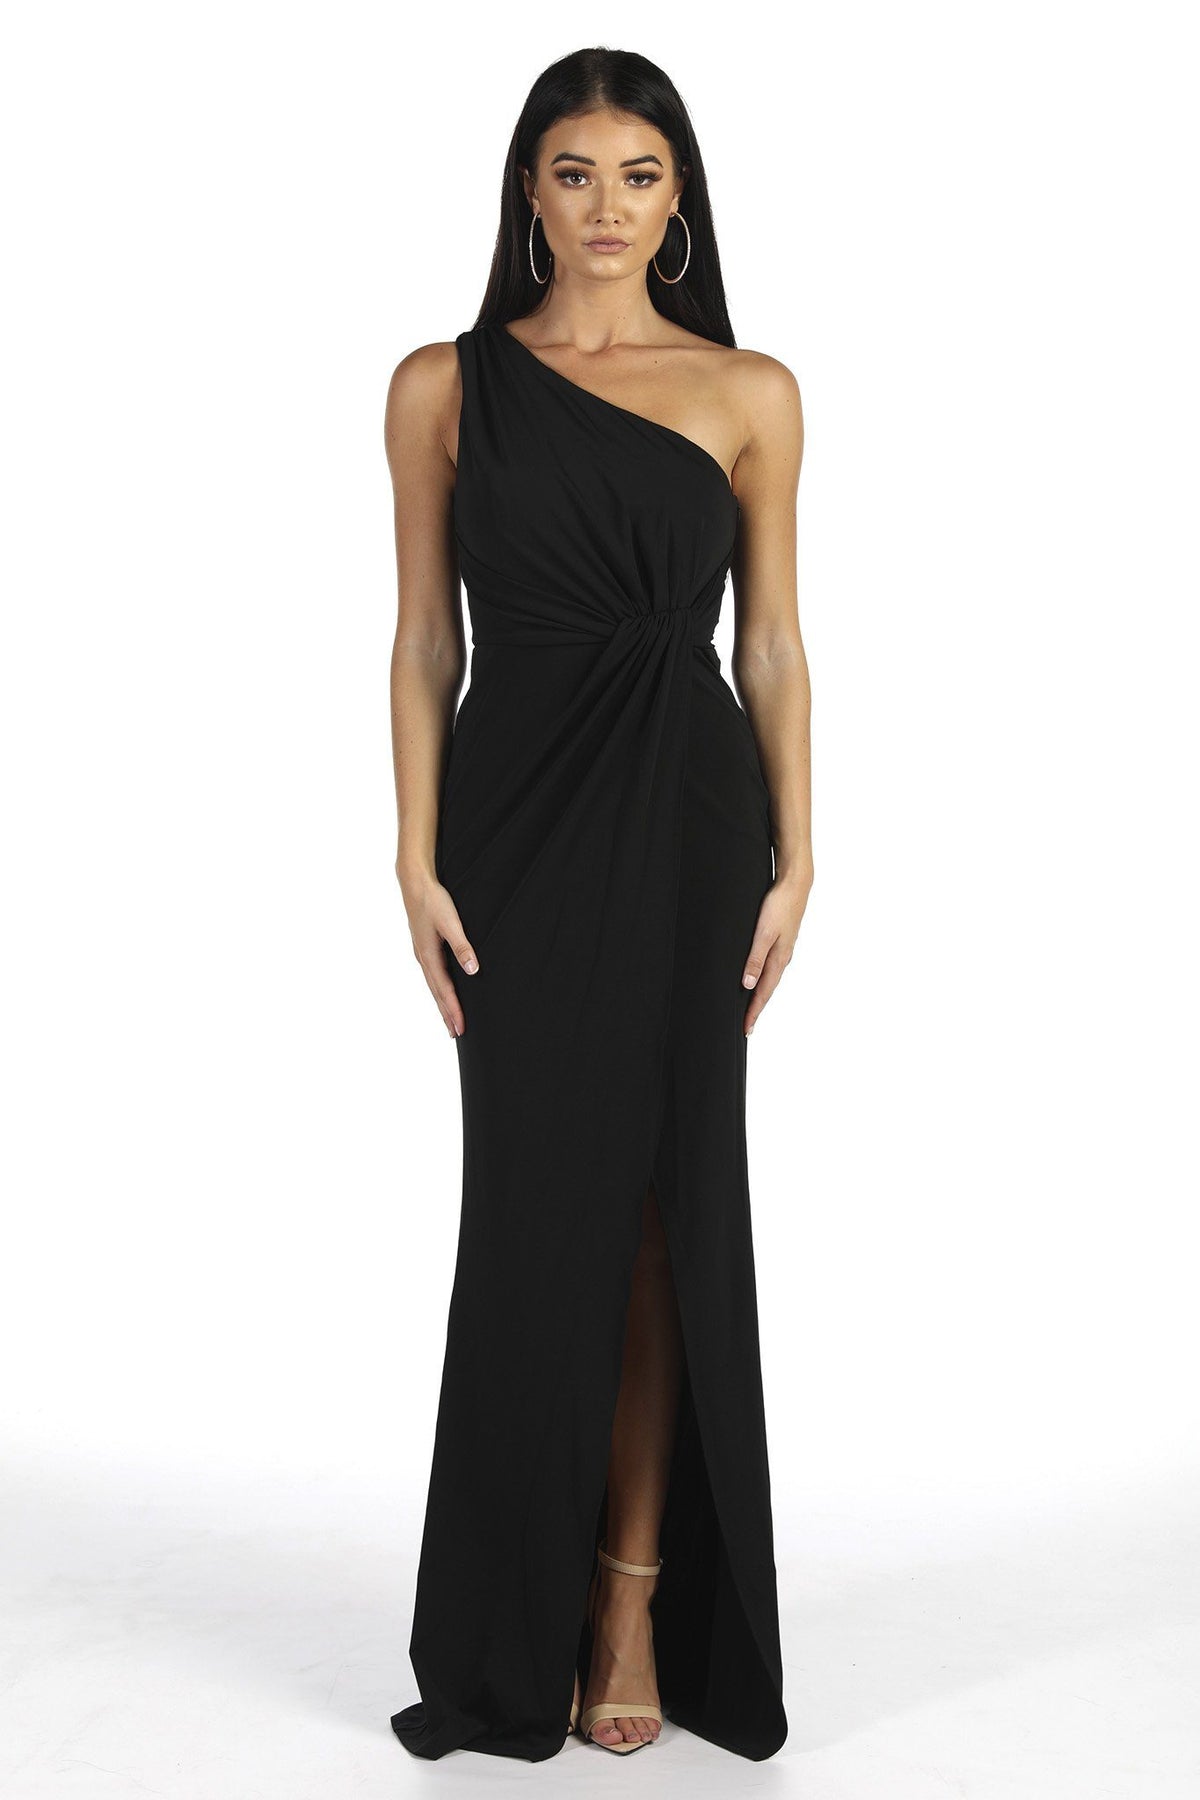 Black One Shoulder Full Length Formal Dress with Asymmetrical One Shoulder Neckline, Ruched Waist, Above Knee High Slit, and a Column Styled Silhouette